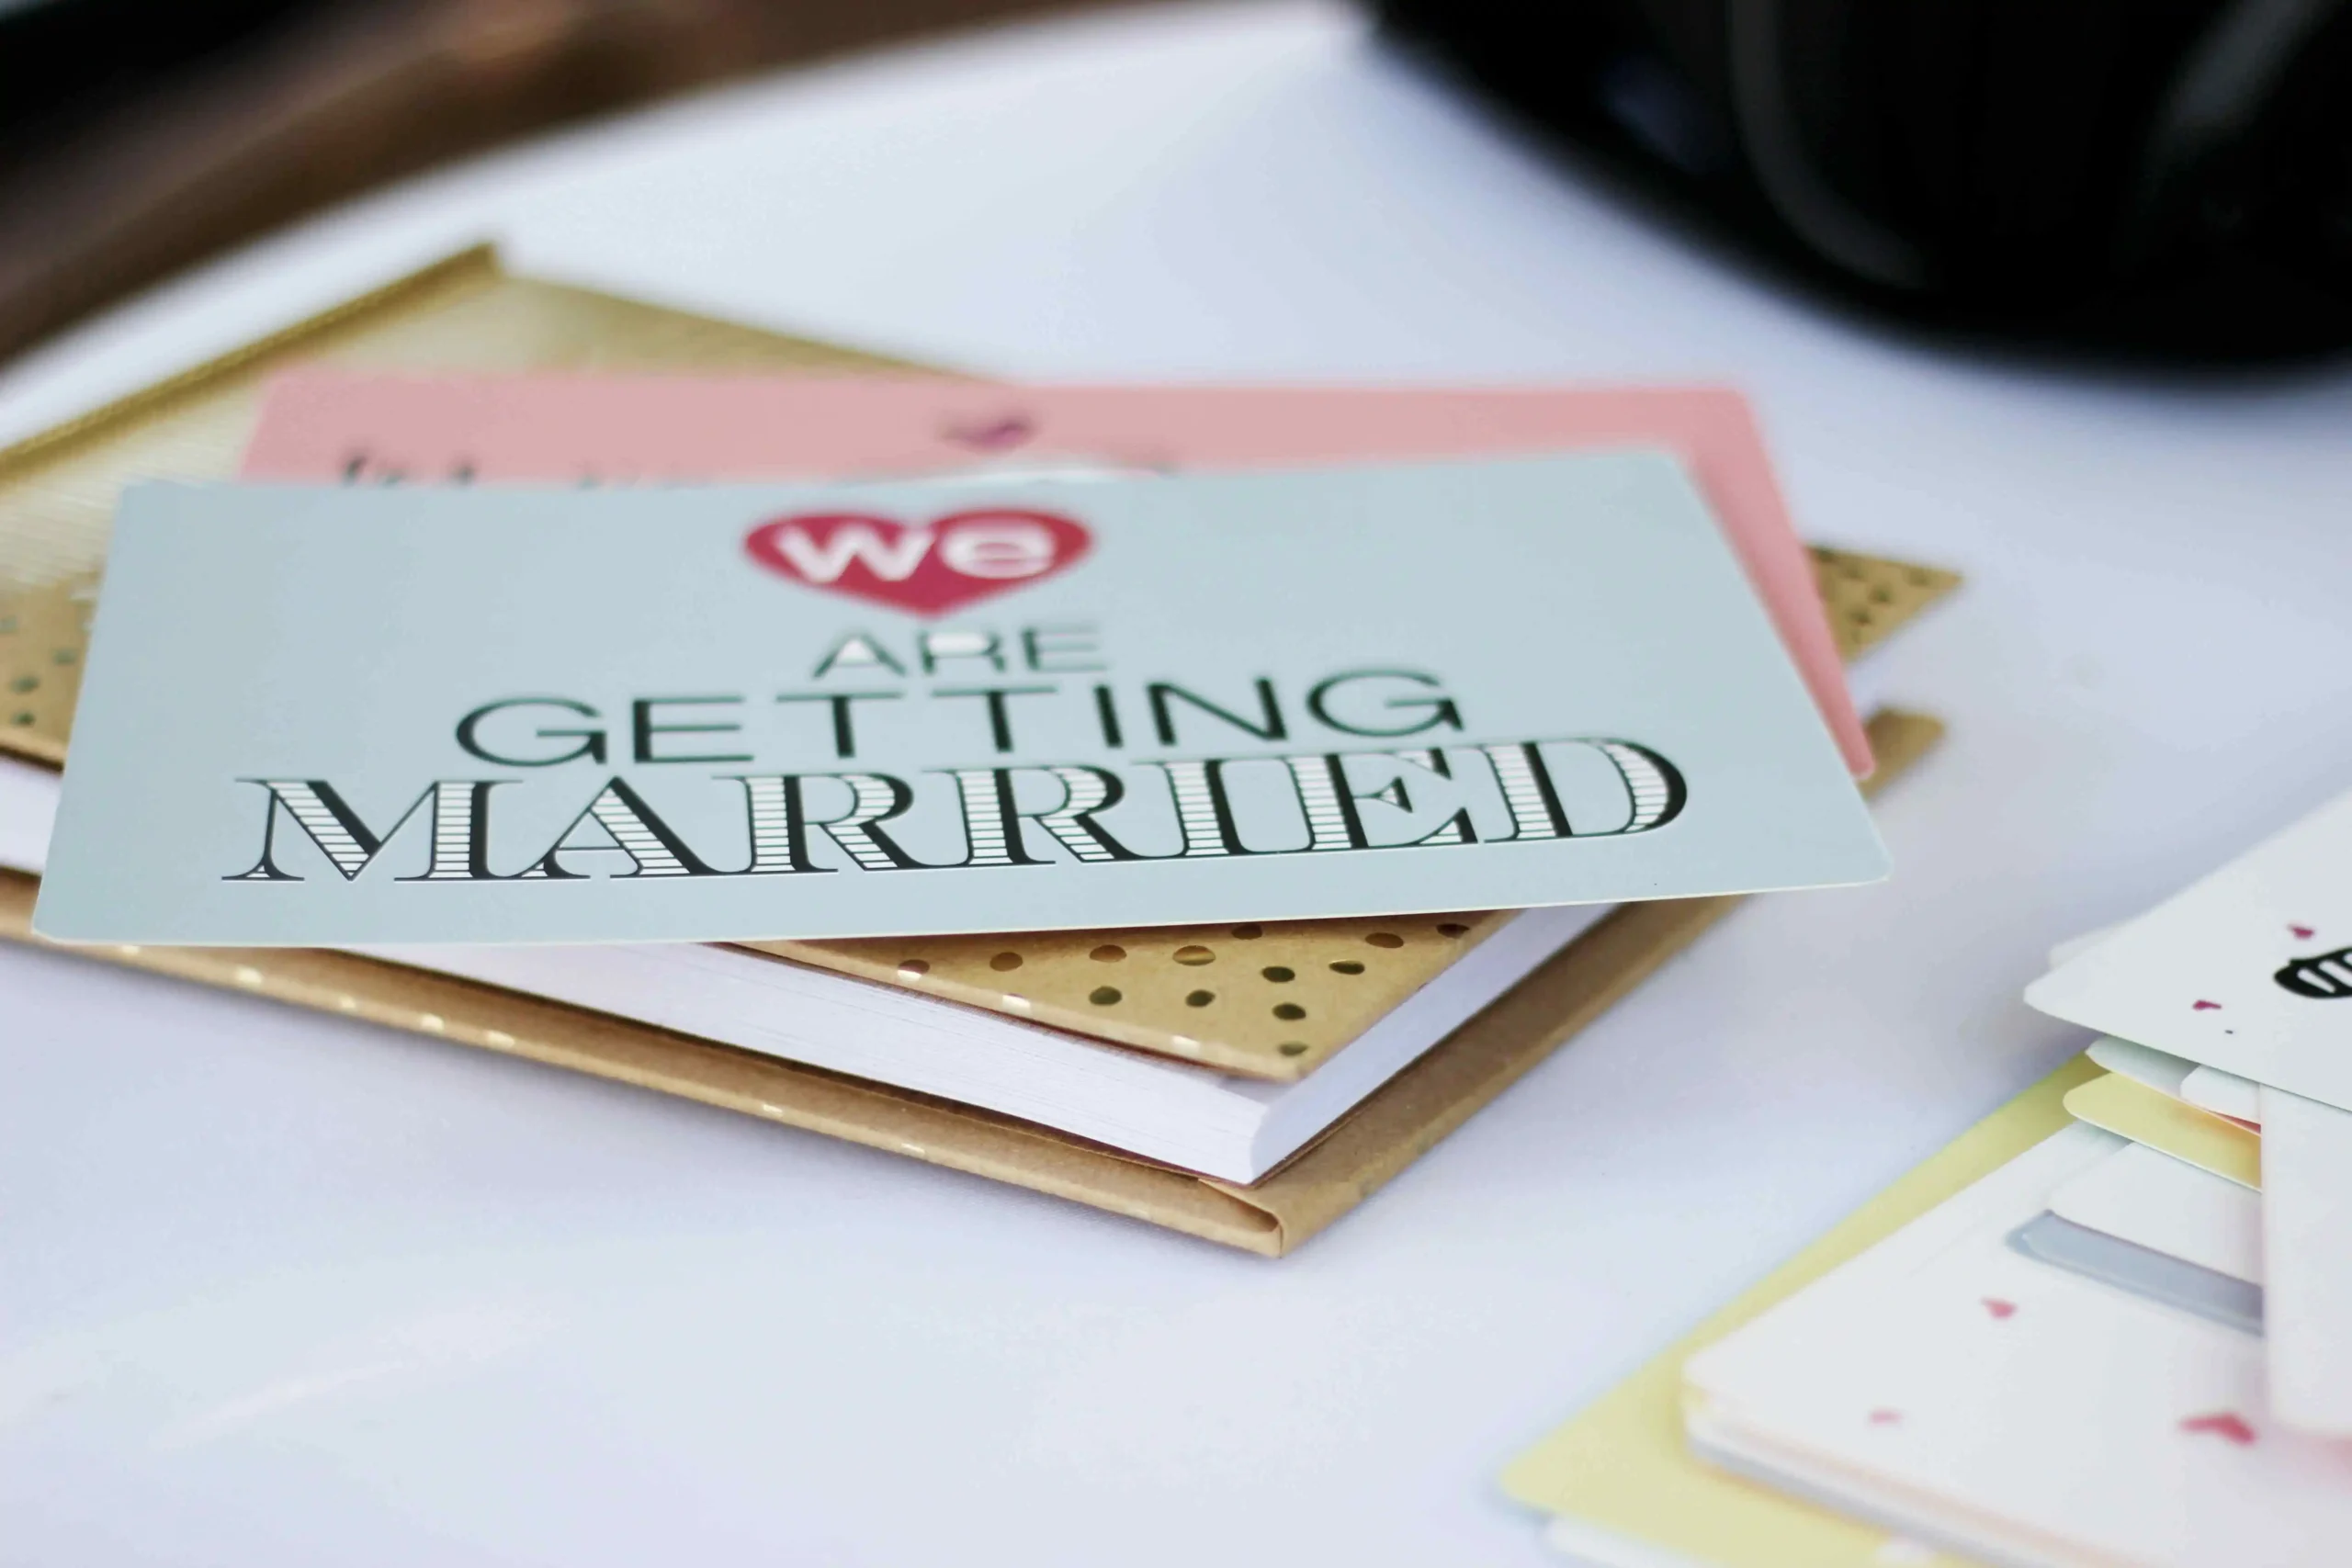 Wedding invitation on top of gold planner